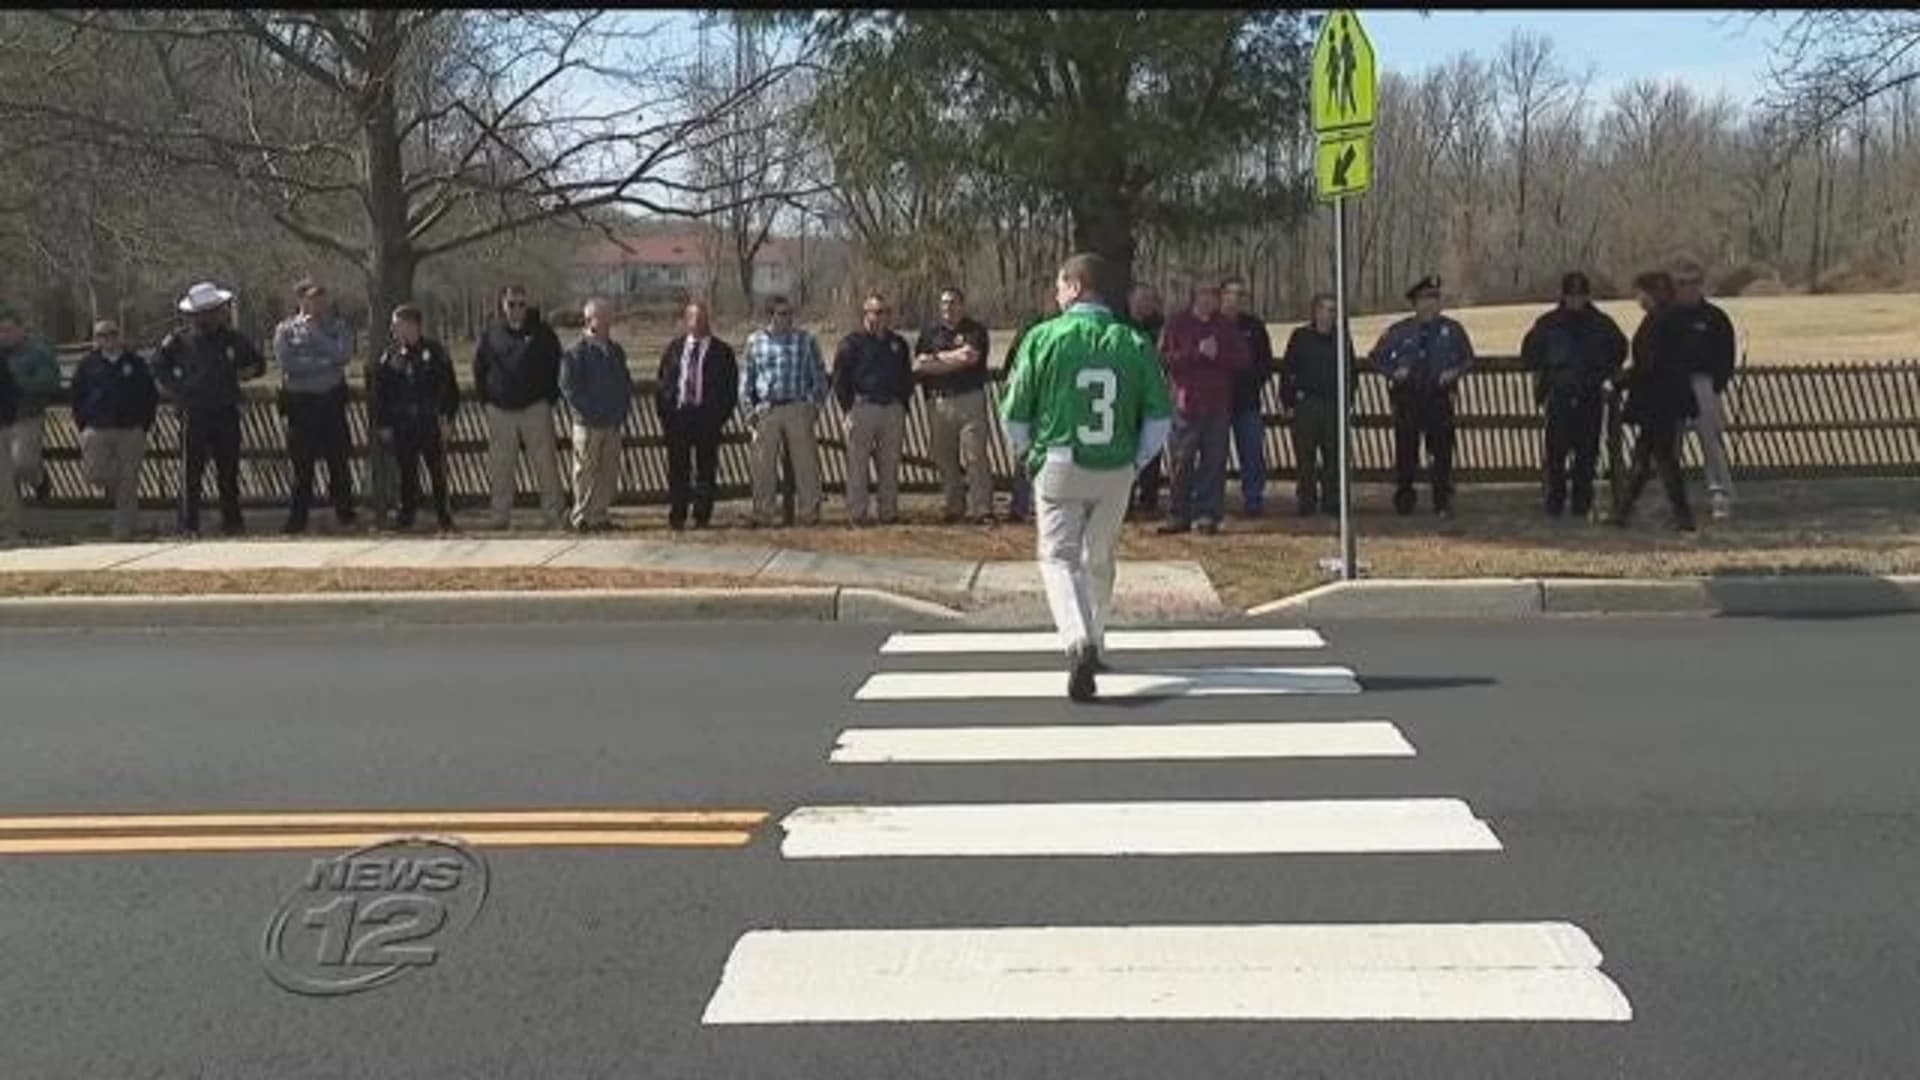 AAA, Monmouth County team up to teach officers pedestrian safety training